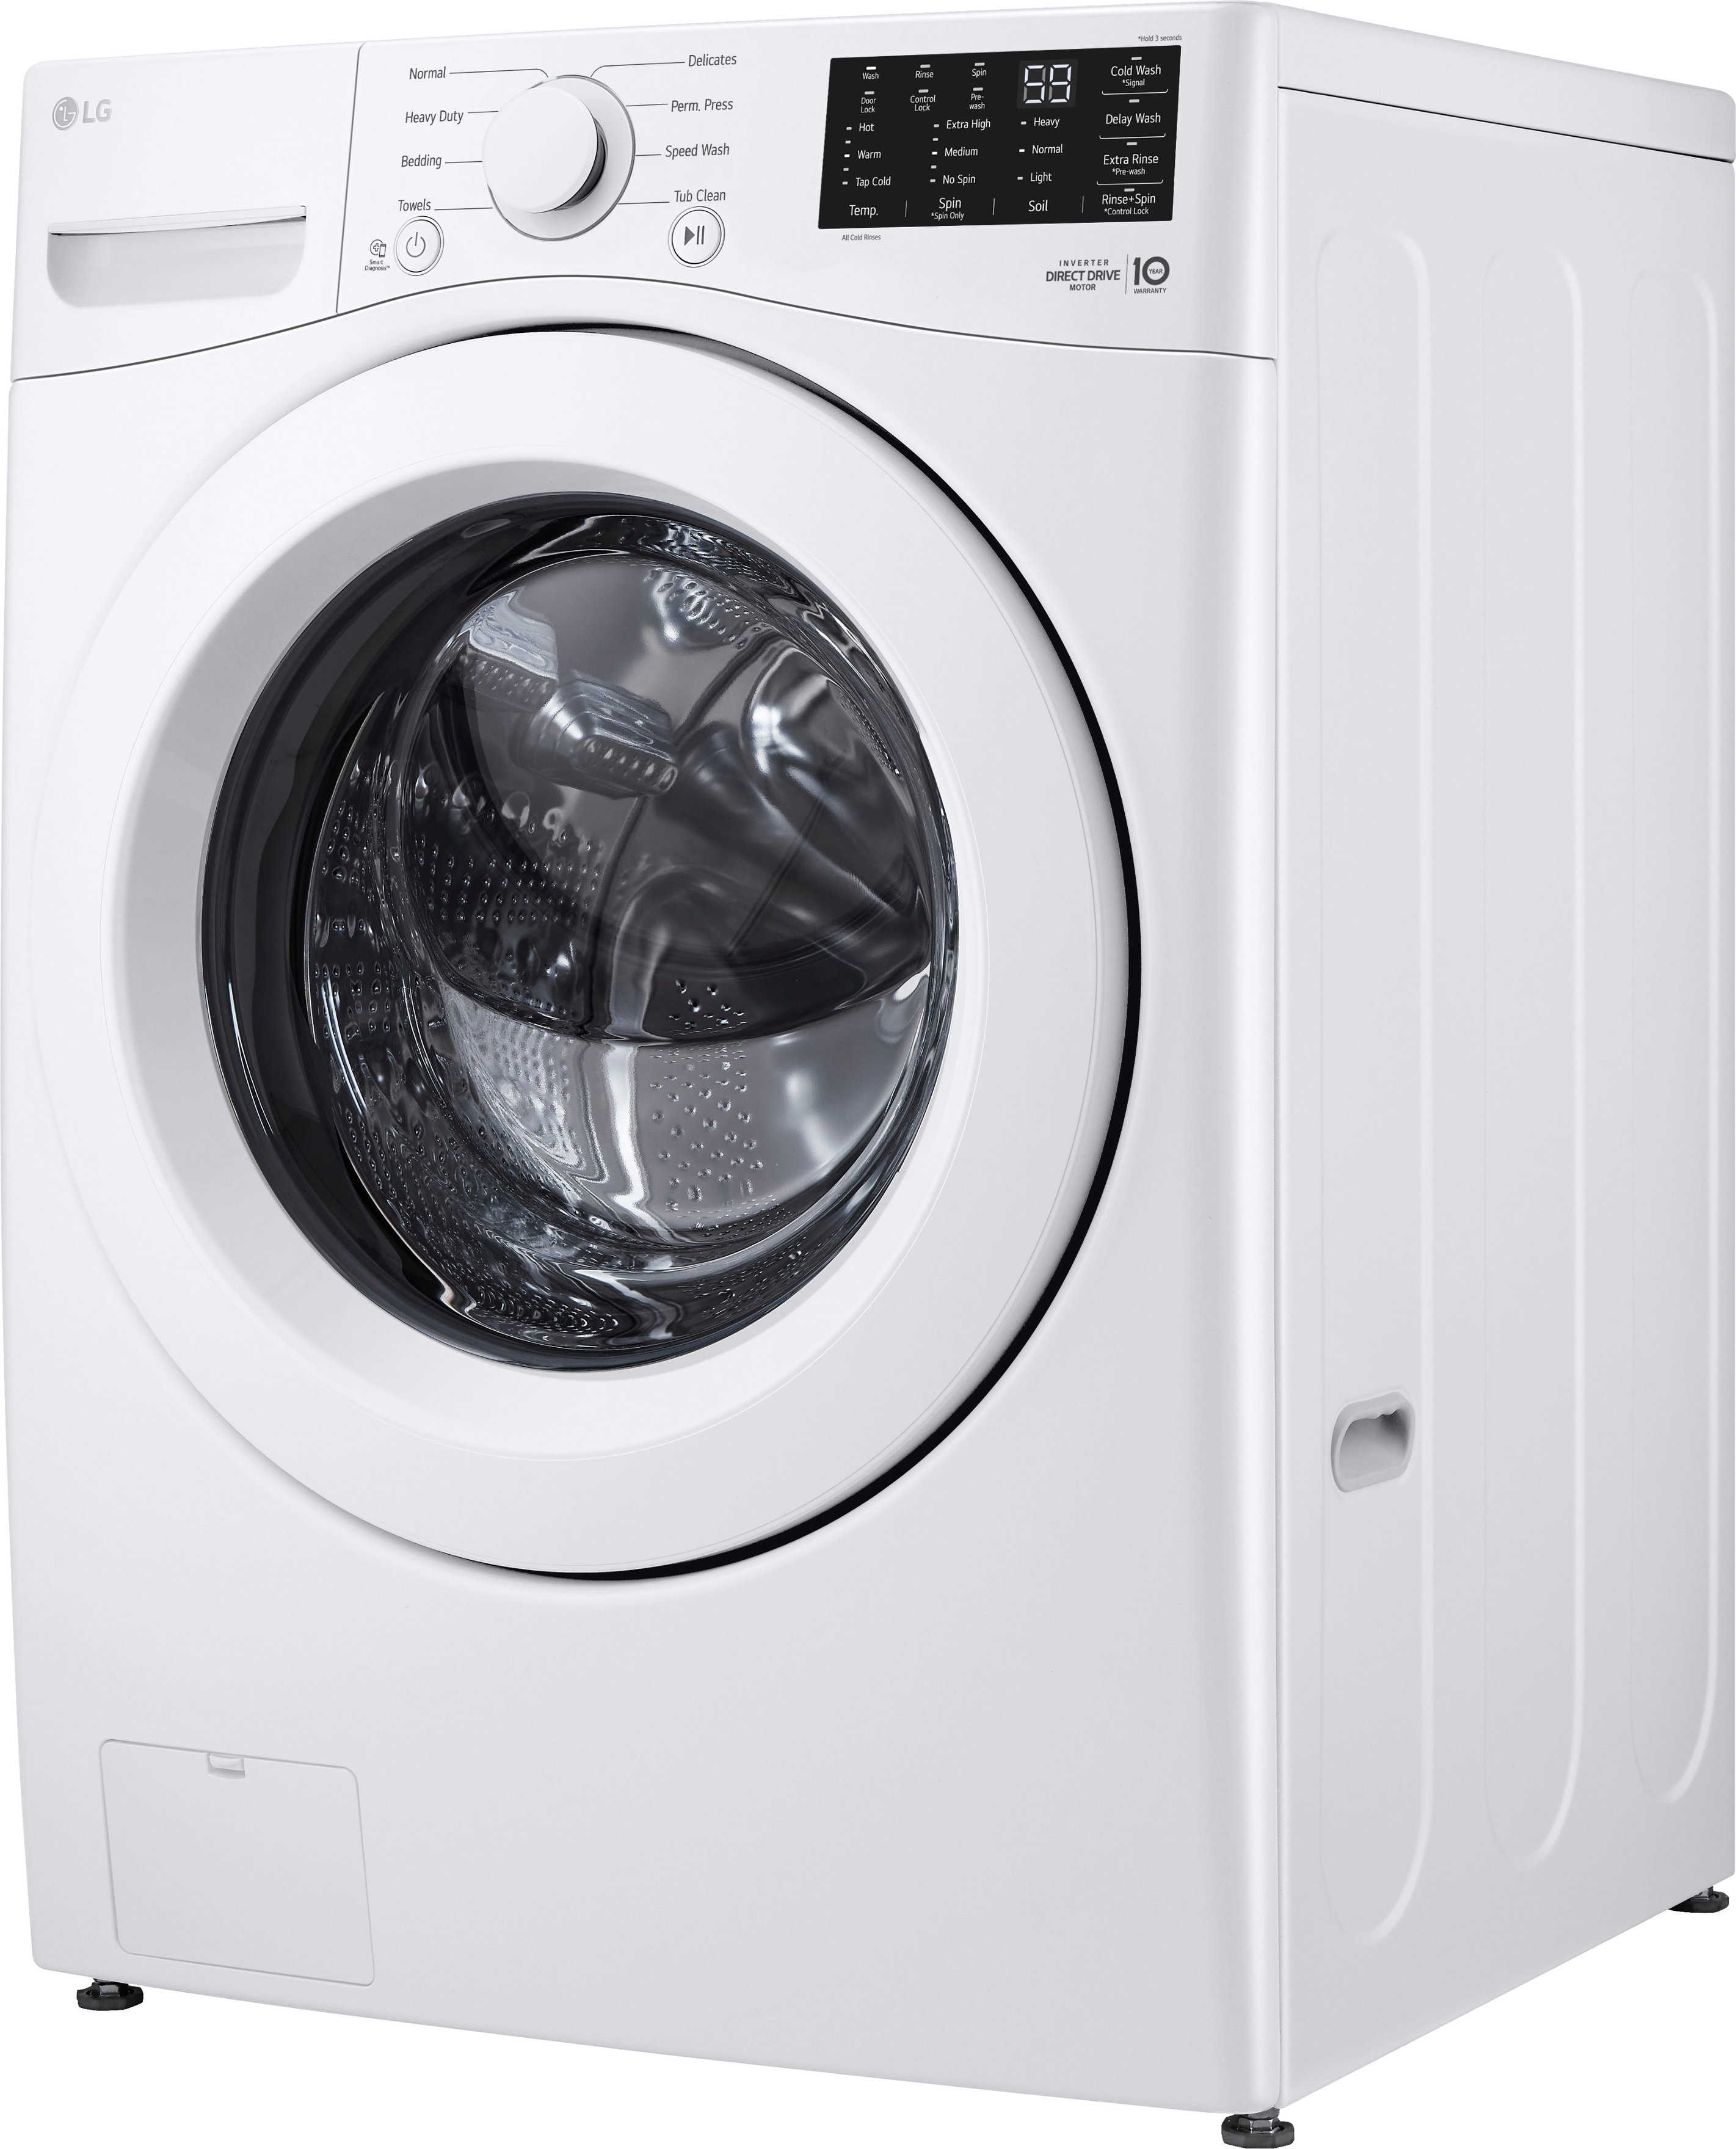 WM3270CW  LG 27 4.5 cu. ft. Front Load Washer - White